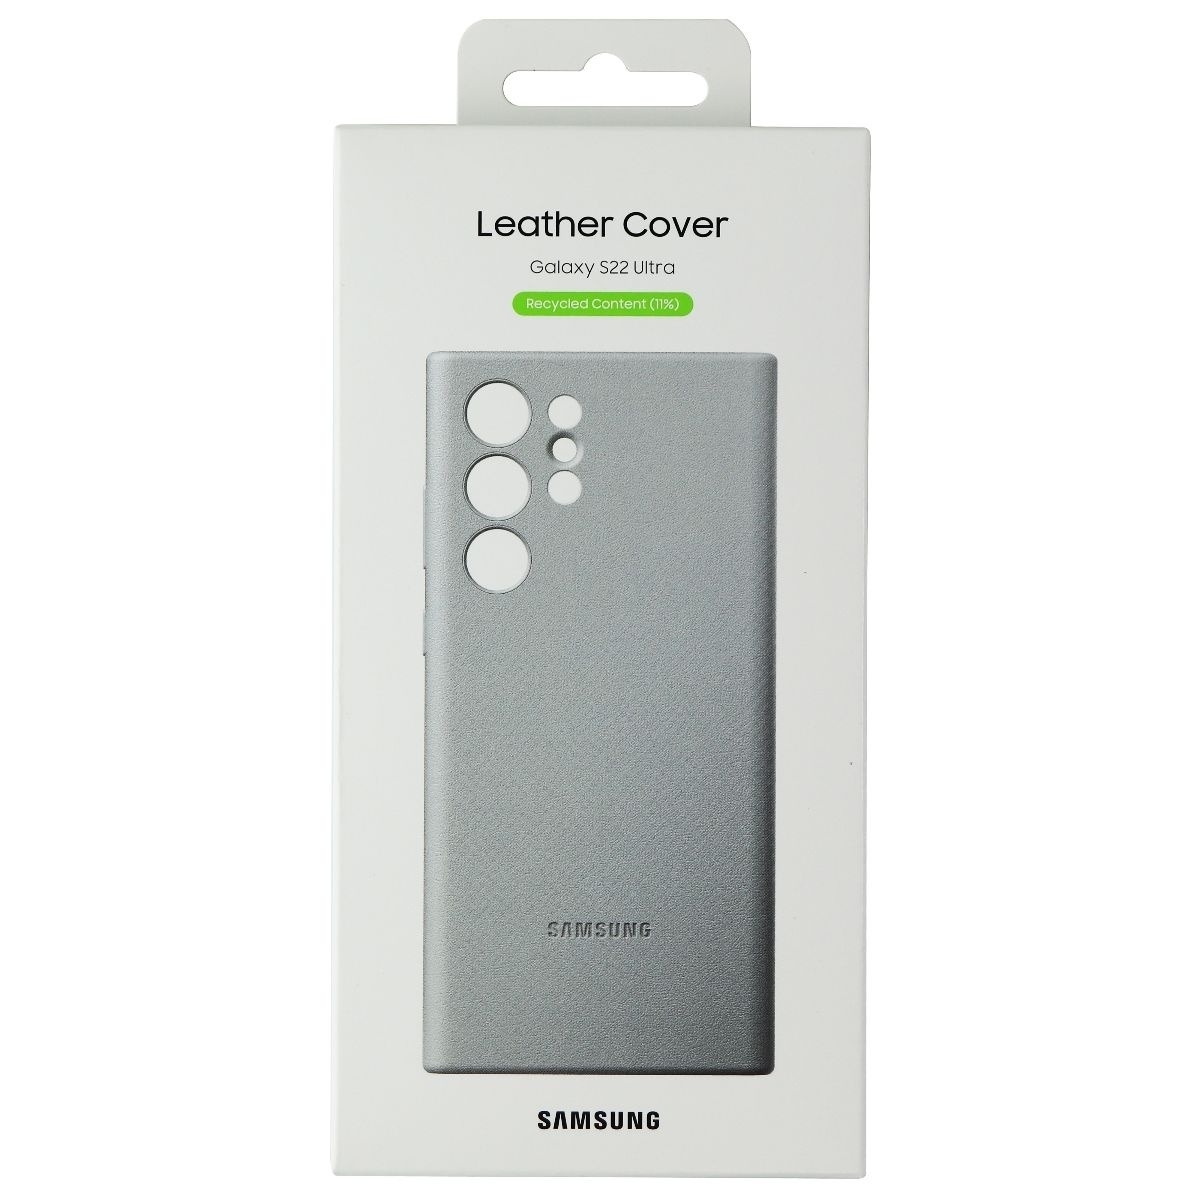 UPC 887276627199 product image for Samsung Leather Cover Case for Samsung Galaxy S22 Ultra - Light Gray | upcitemdb.com